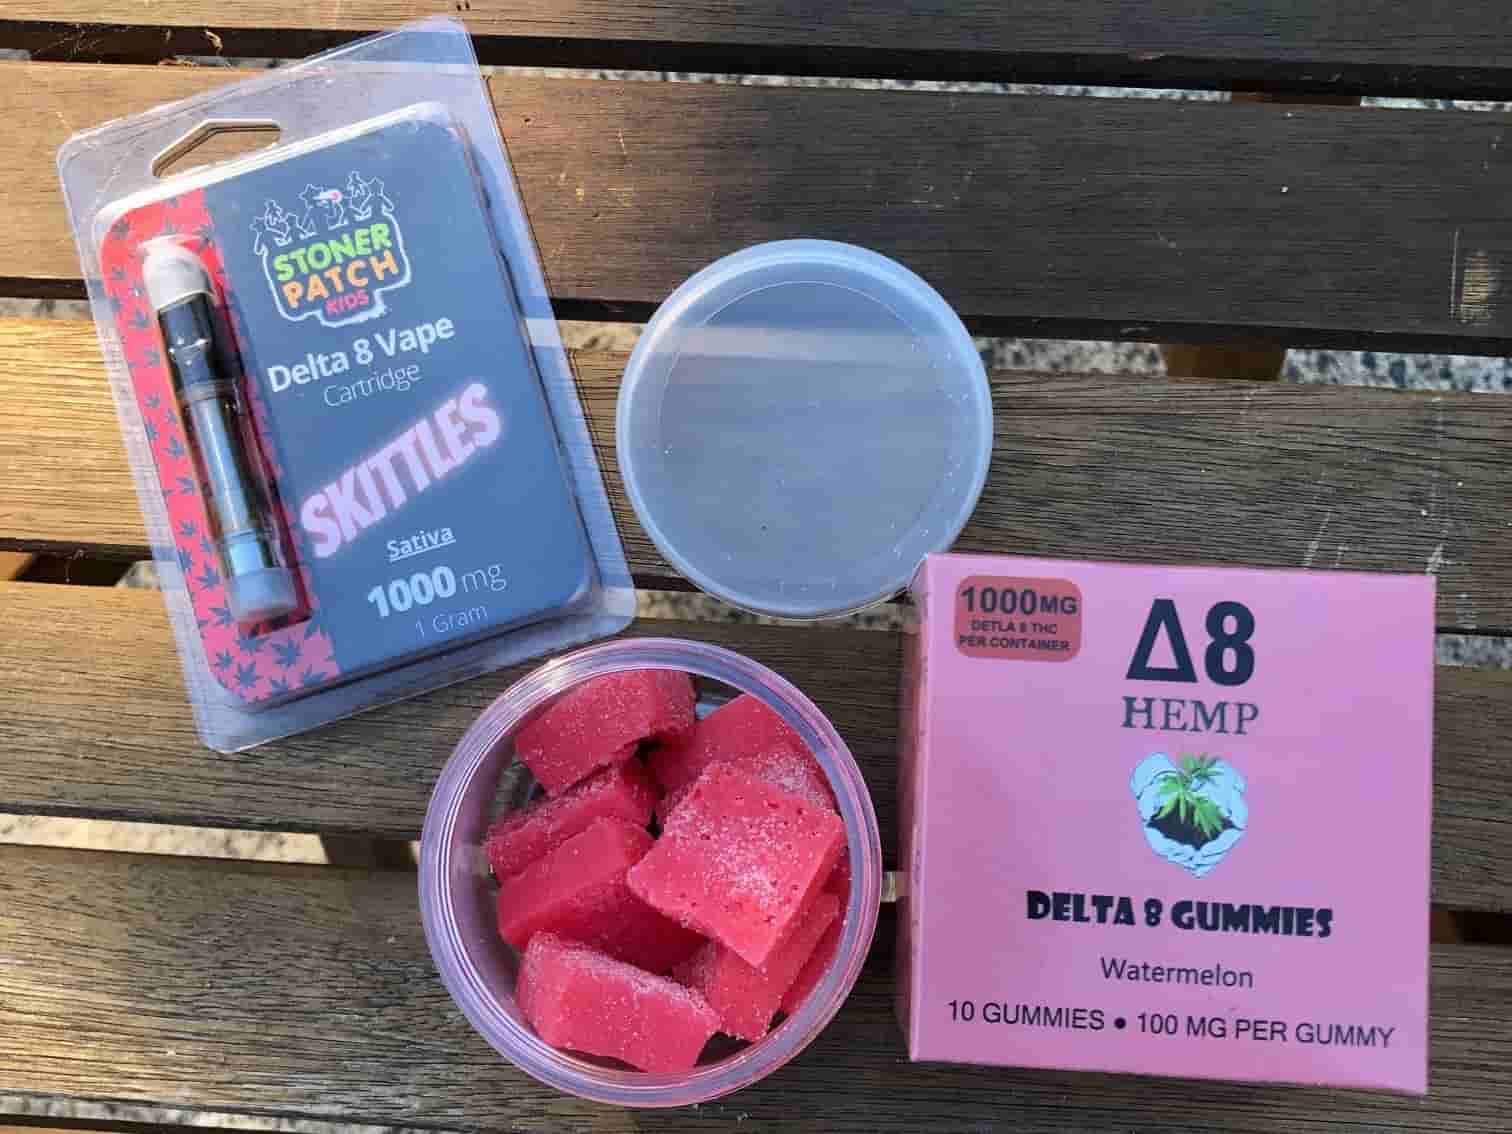 DELTA 8 EDIBLES FOR SALE - Gummies|Thc|Products|Hemp|Product|Brand|Effects|Delta|Gummy|Cbd|Origin|Quality|Dosage|Delta-8|Dose|Usasource|Flavors|Brands|Ingredients|Range|Customers|Edibles|Cartridges|Reviews|Side|List|Health|Cannabis|Lab|Customer|Options|Benefits|Overviewproducts|Research|Time|Market|Drug|Farms|Party|People|Delta-8 Thc|Delta-8 Products|Delta-9 Thc|Delta-8 Gummies|Delta-8 Thc Products|Delta-8 Brands|Customer Reviews|Brand Overviewproducts|Drug Tests|Free Shipping|Similar Benefits|Vape Cartridges|Hemp Doctor|United States|Third Party Lab|Drug Test|Thc Edibles|Health Canada|Cannabis Plant|Side Effects|Organic Hemp|Diamond Cbd|Reaction Time|Legal Hemp|Psychoactive Effects|Psychoactive Properties|Third Party|Dry Eyes|Delta-8 Market|Tolerance Level